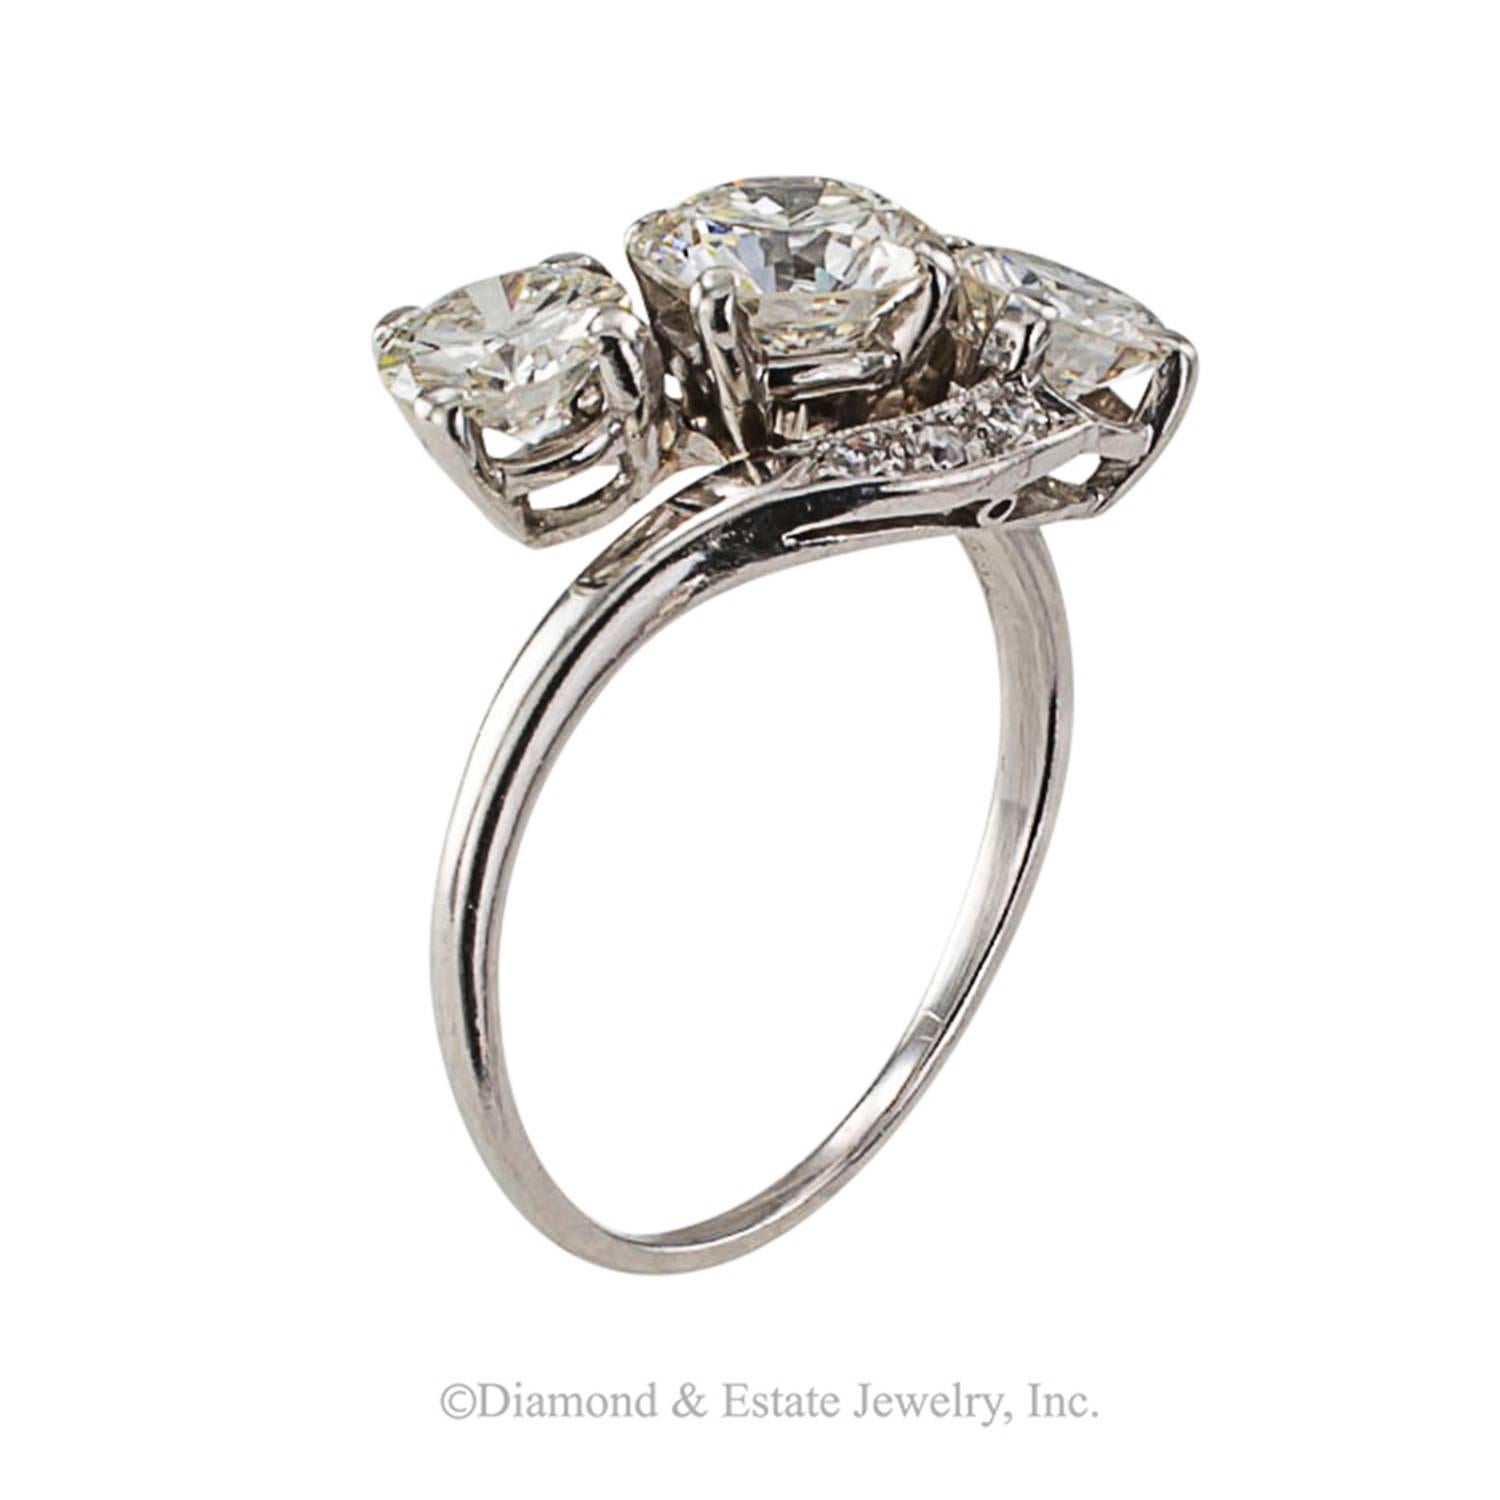 Mid Century Three Stone Diamond Ring

During the 1950s, jewelry design took a unique turn.  In general people felt prosperous and they wanted tasteful, but diamond intensive jewelry pieces, preferably mounted in platinum or white gold.  The